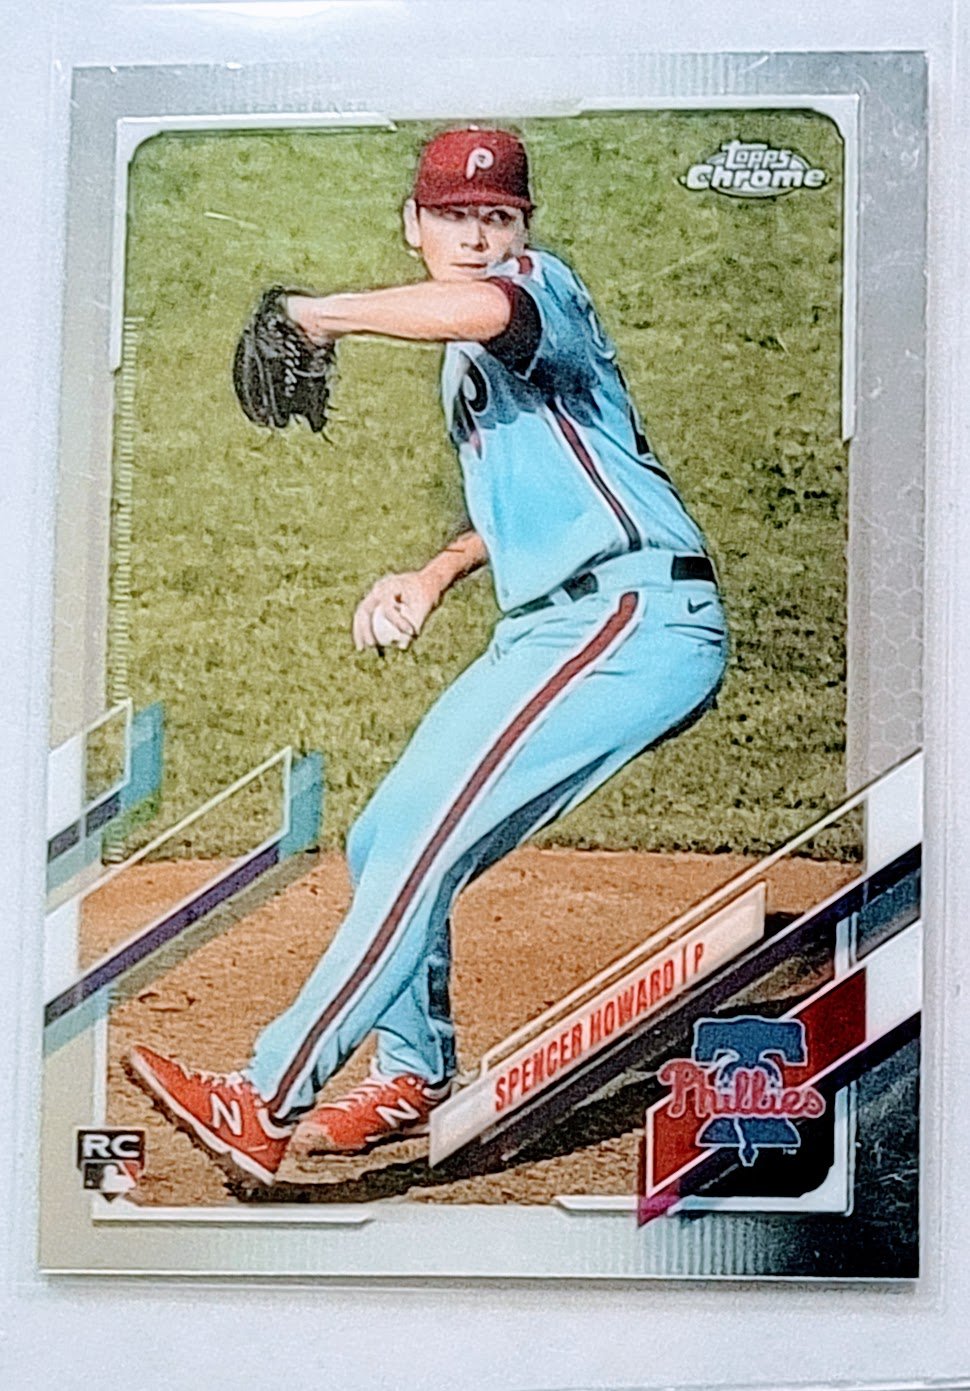 2021 Topps Chrome Spencer Howard Rookie Baseball Card TPTV simple Xclusive Collectibles   